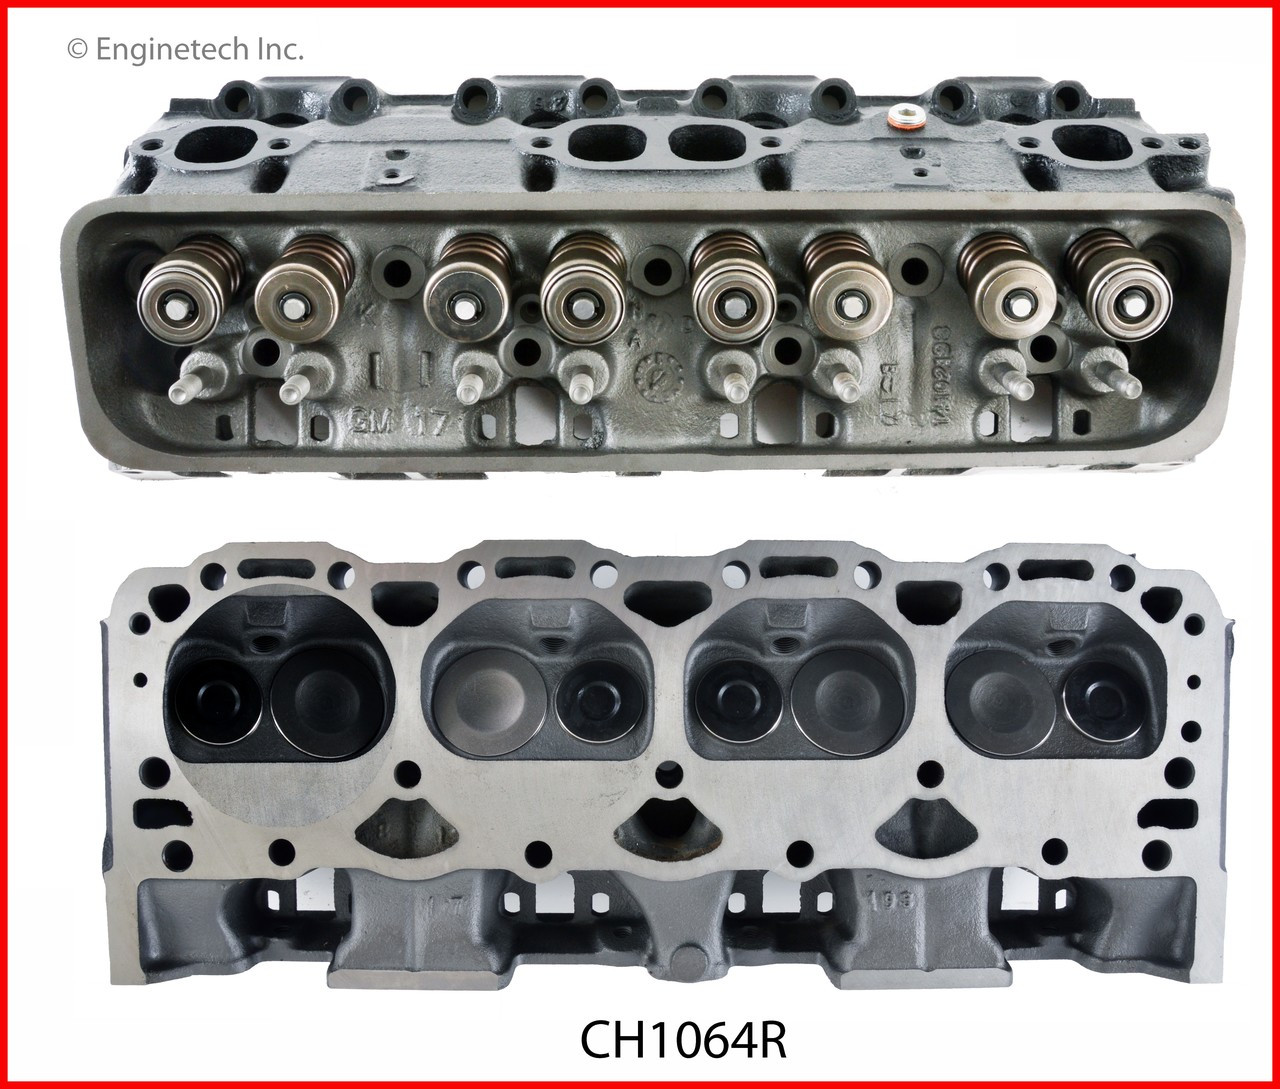 Cylinder Head Assembly - 1988 Chevrolet R30 5.7L (CH1064R.E49)